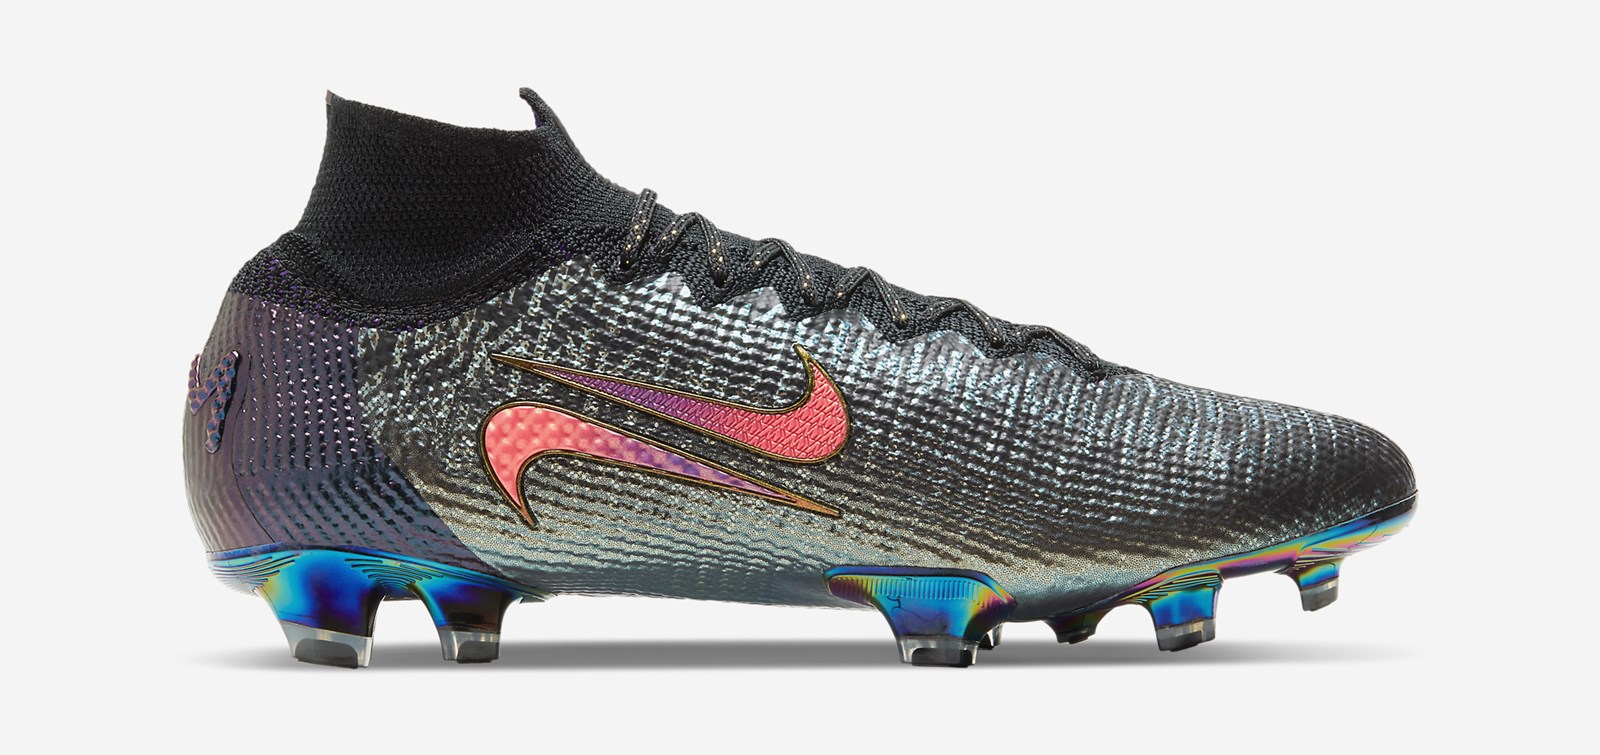 mbappe new boots 2020